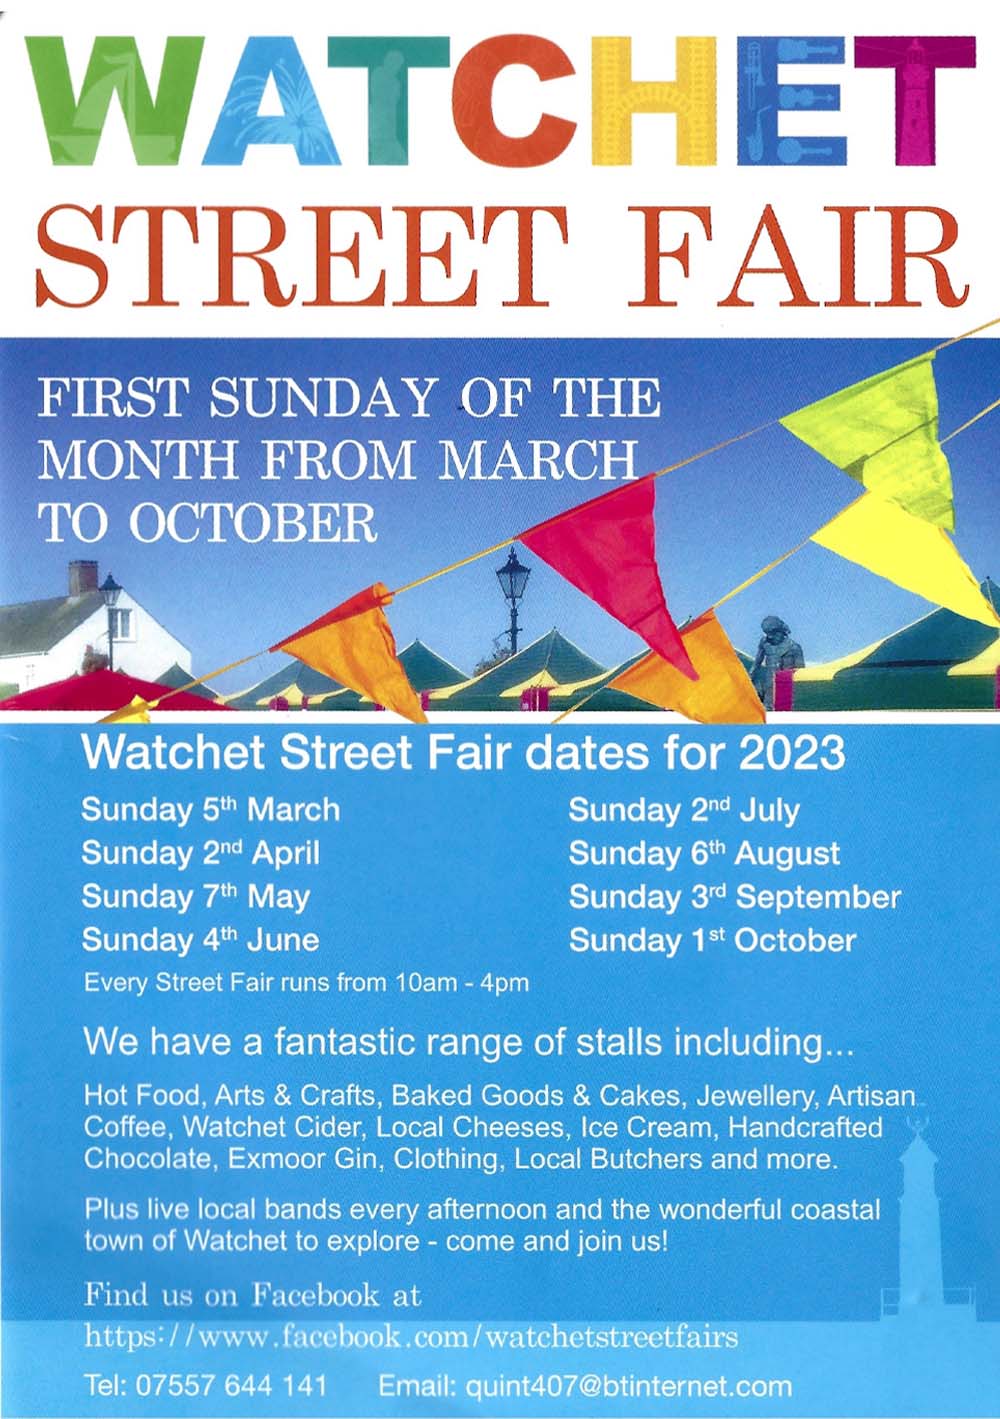 Watchet street fairs flyer with dates for 2023 fairs